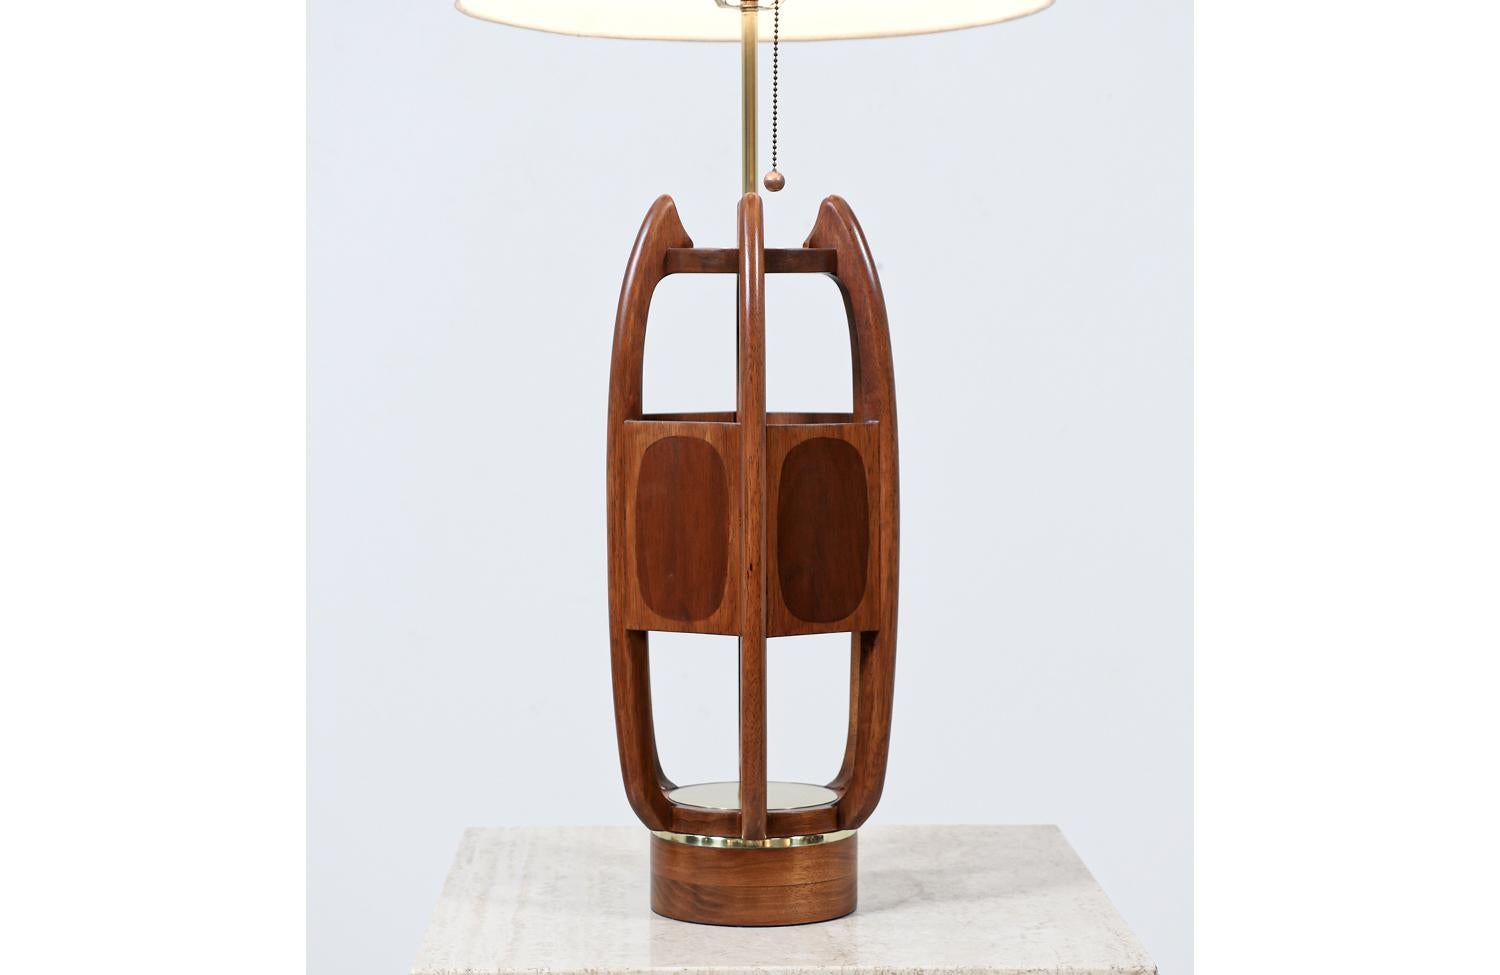 California Modern Sculpted Table Lamp with Inlaid Wood by Modeline of CA 1